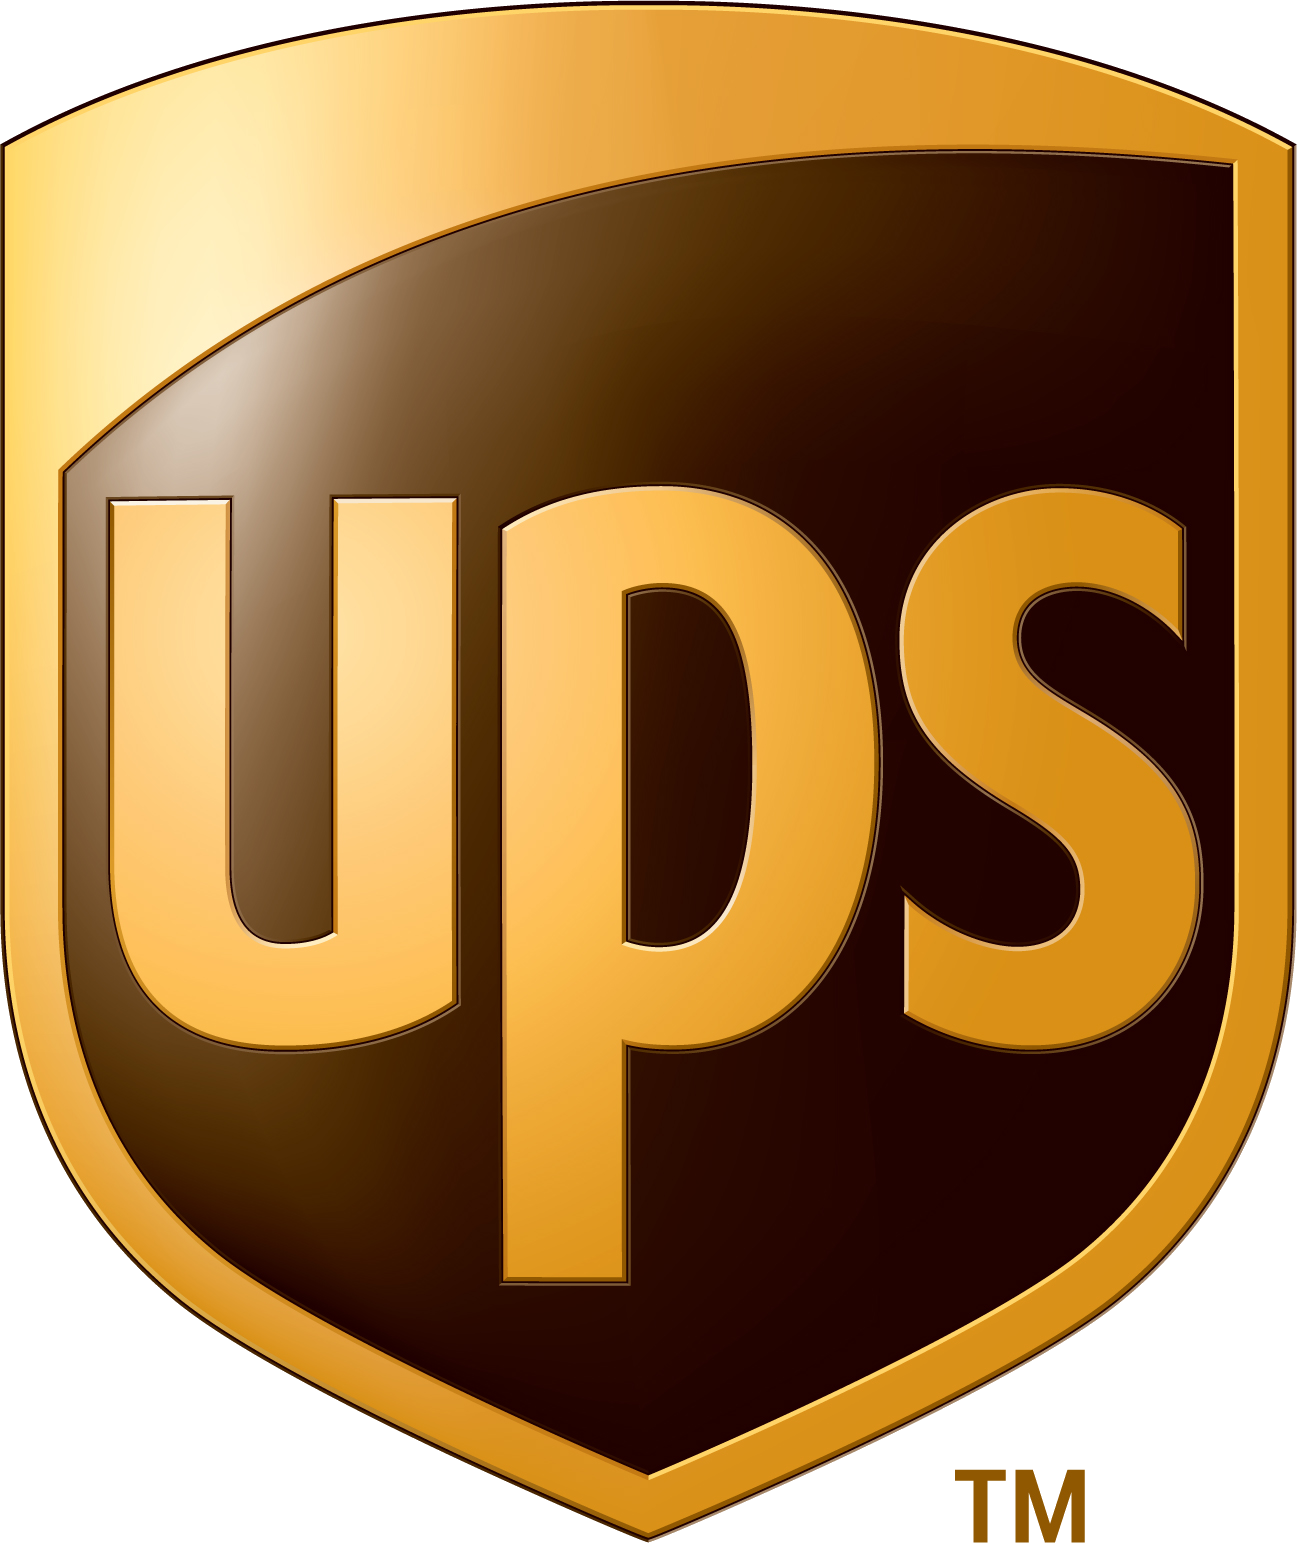 UPS will hire over 90,000 seasonal workers for holiday delivery surge